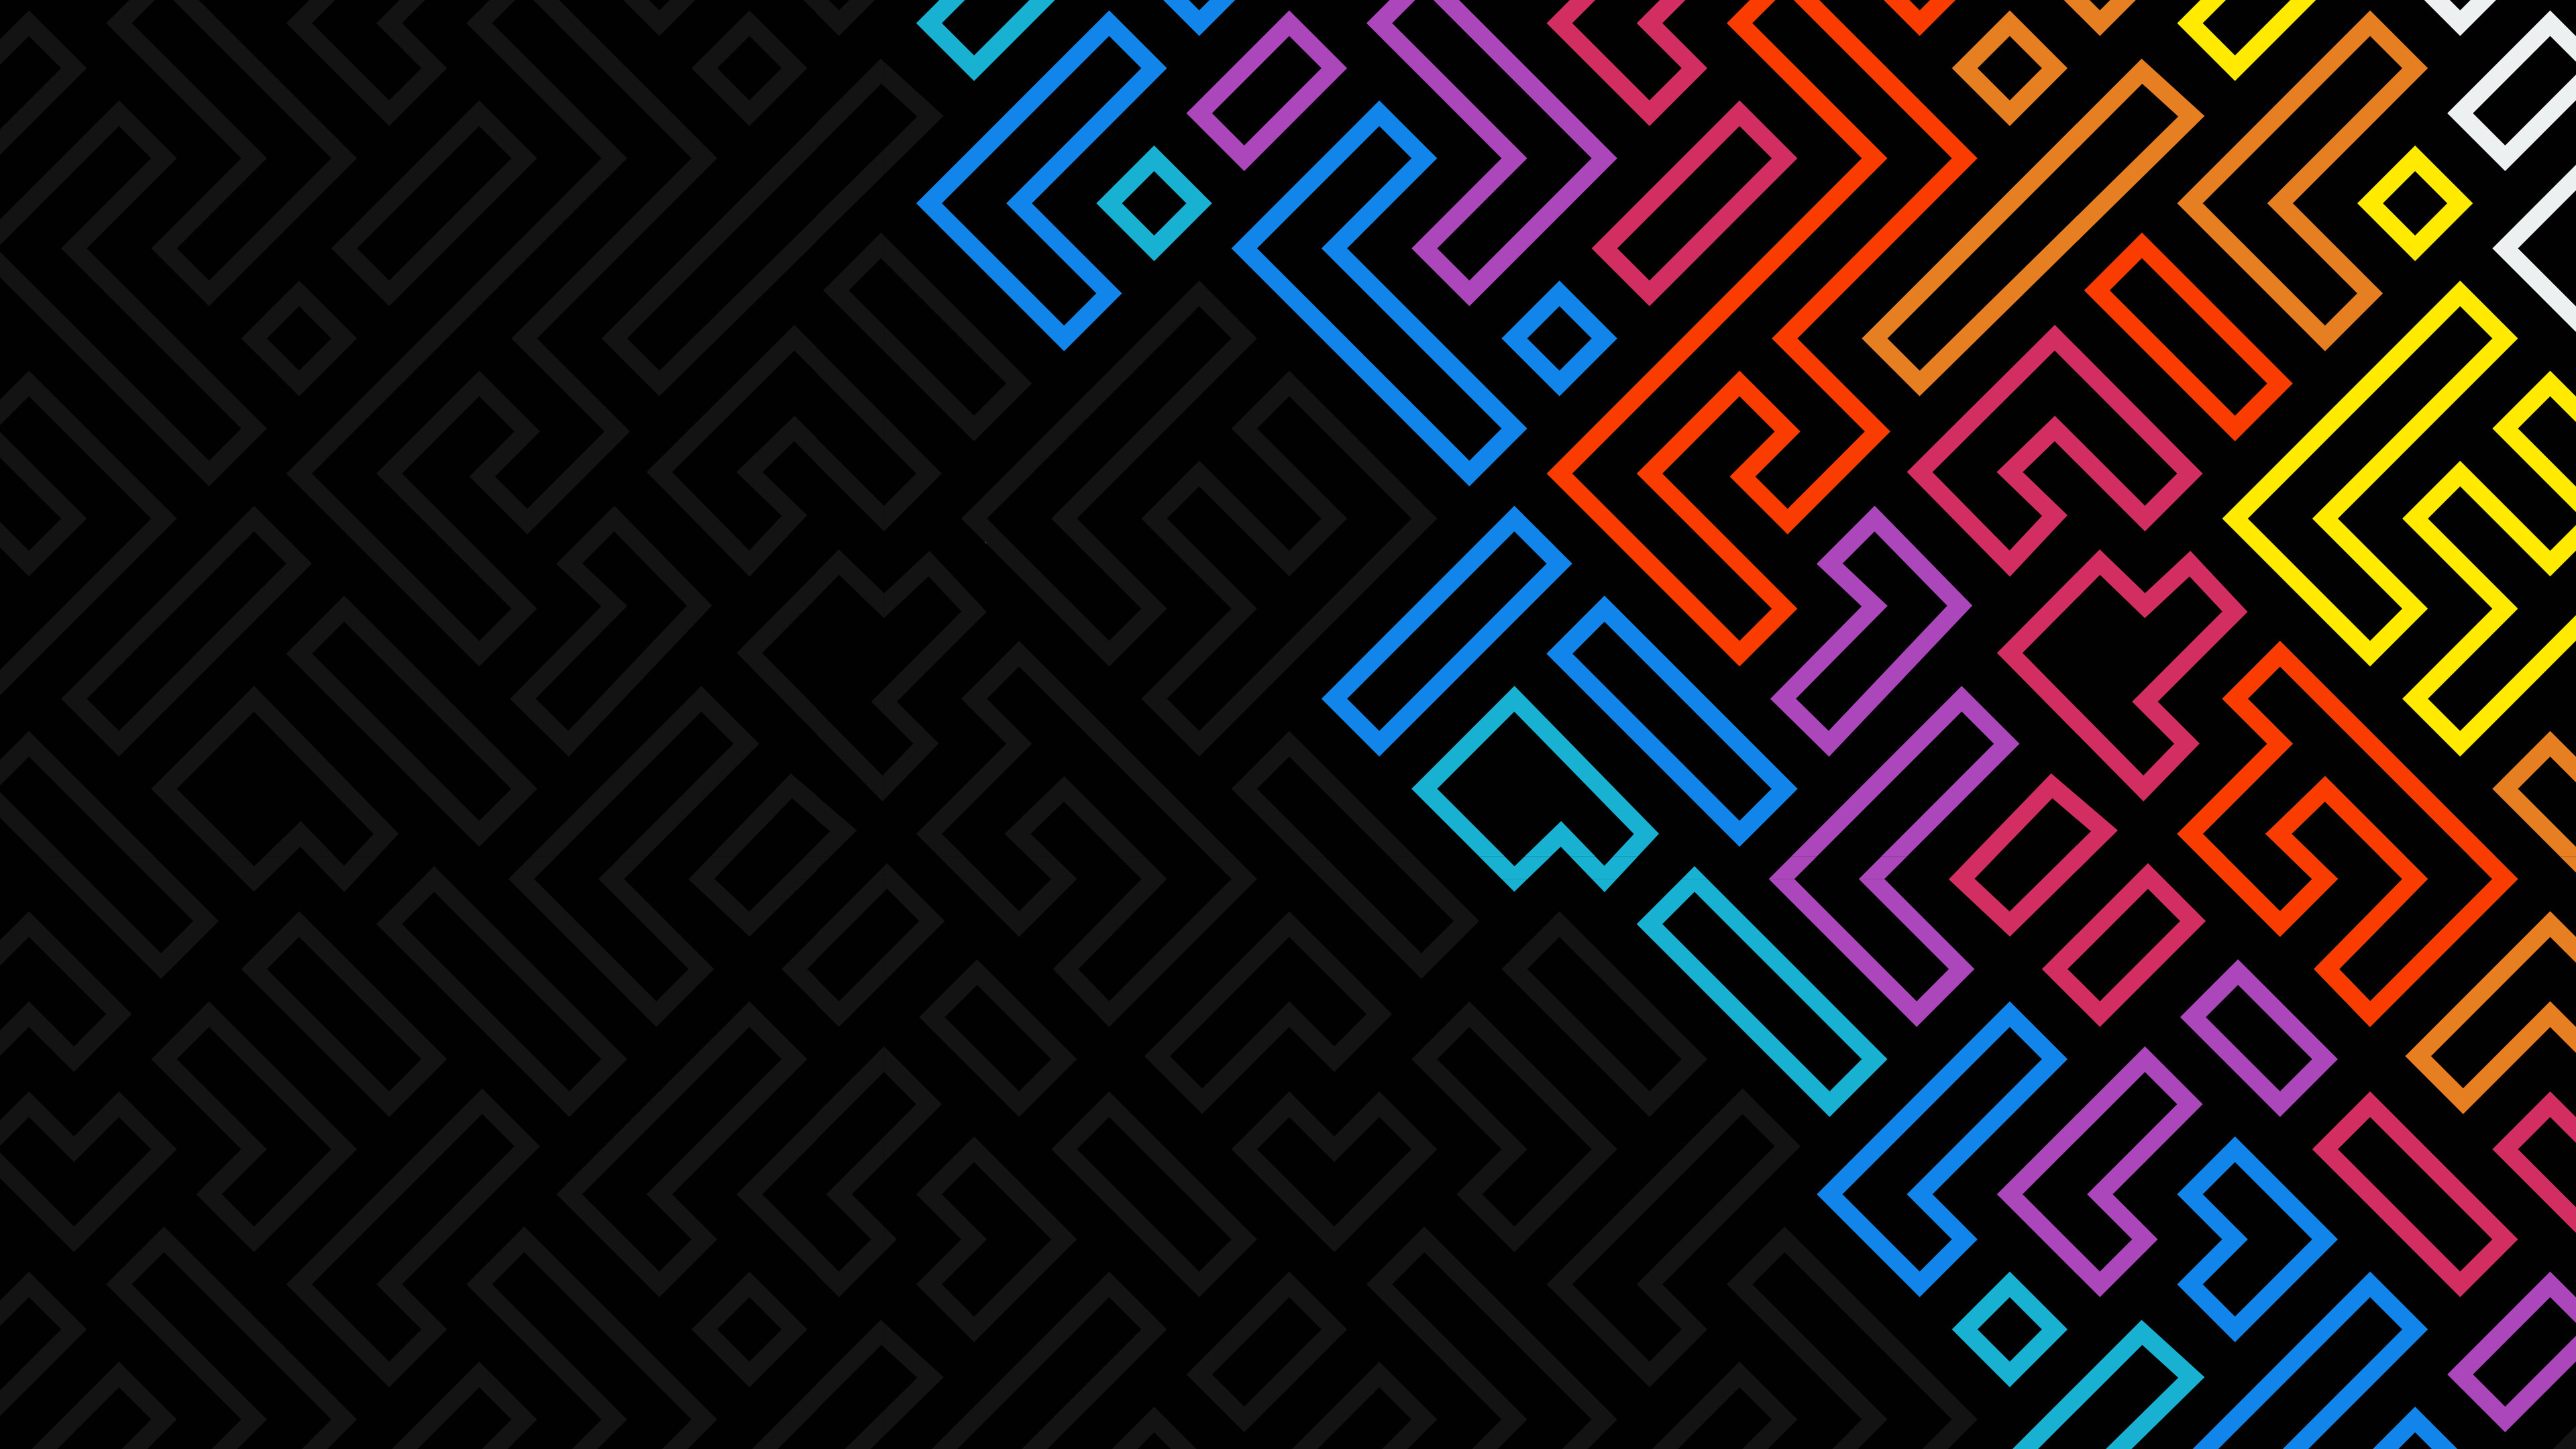 Abstract k wallpapers for your desktop or mobile screen free and easy to download